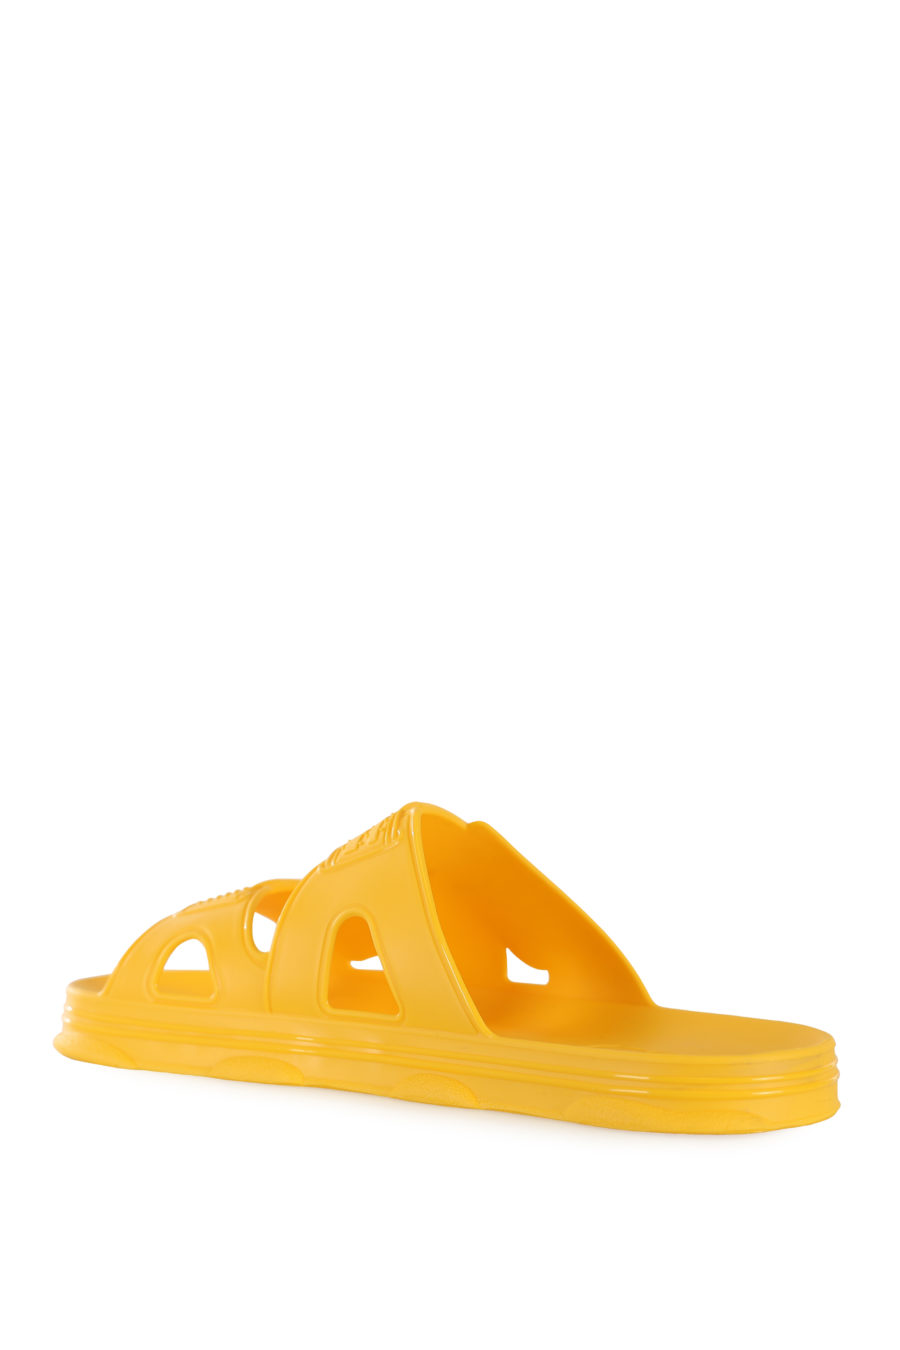 Yellow rubber flip flops with white logo - IMG 1686